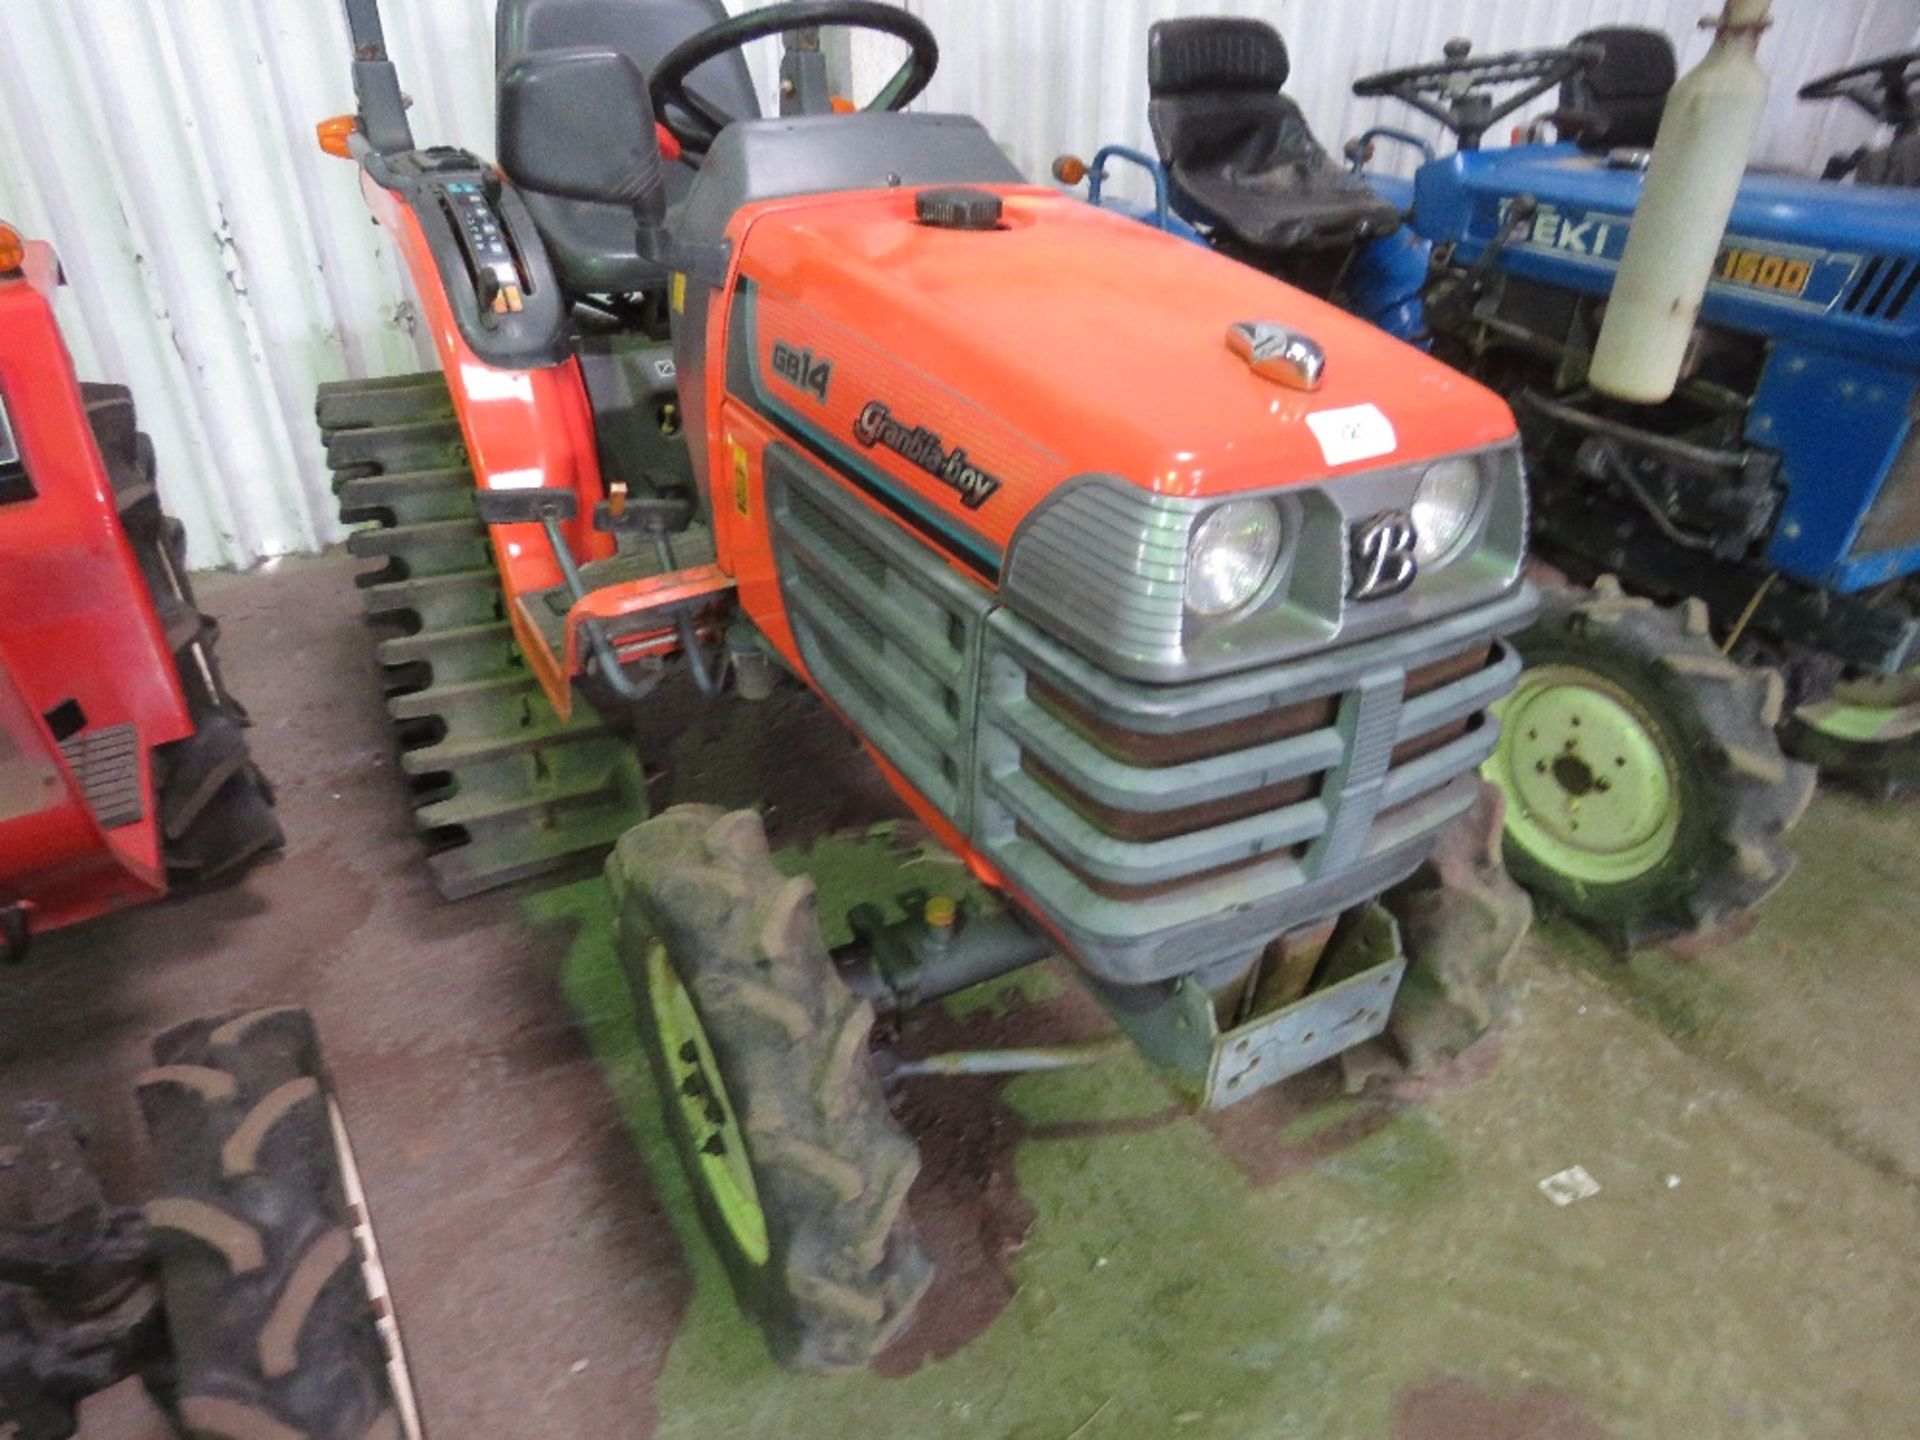 GB14 4WD 14HP HALF TRACK COMPACT TRACTOR WITH REAR LINKAGE WHEN TESTED WAS SEEN TO START, DRIVE, STE